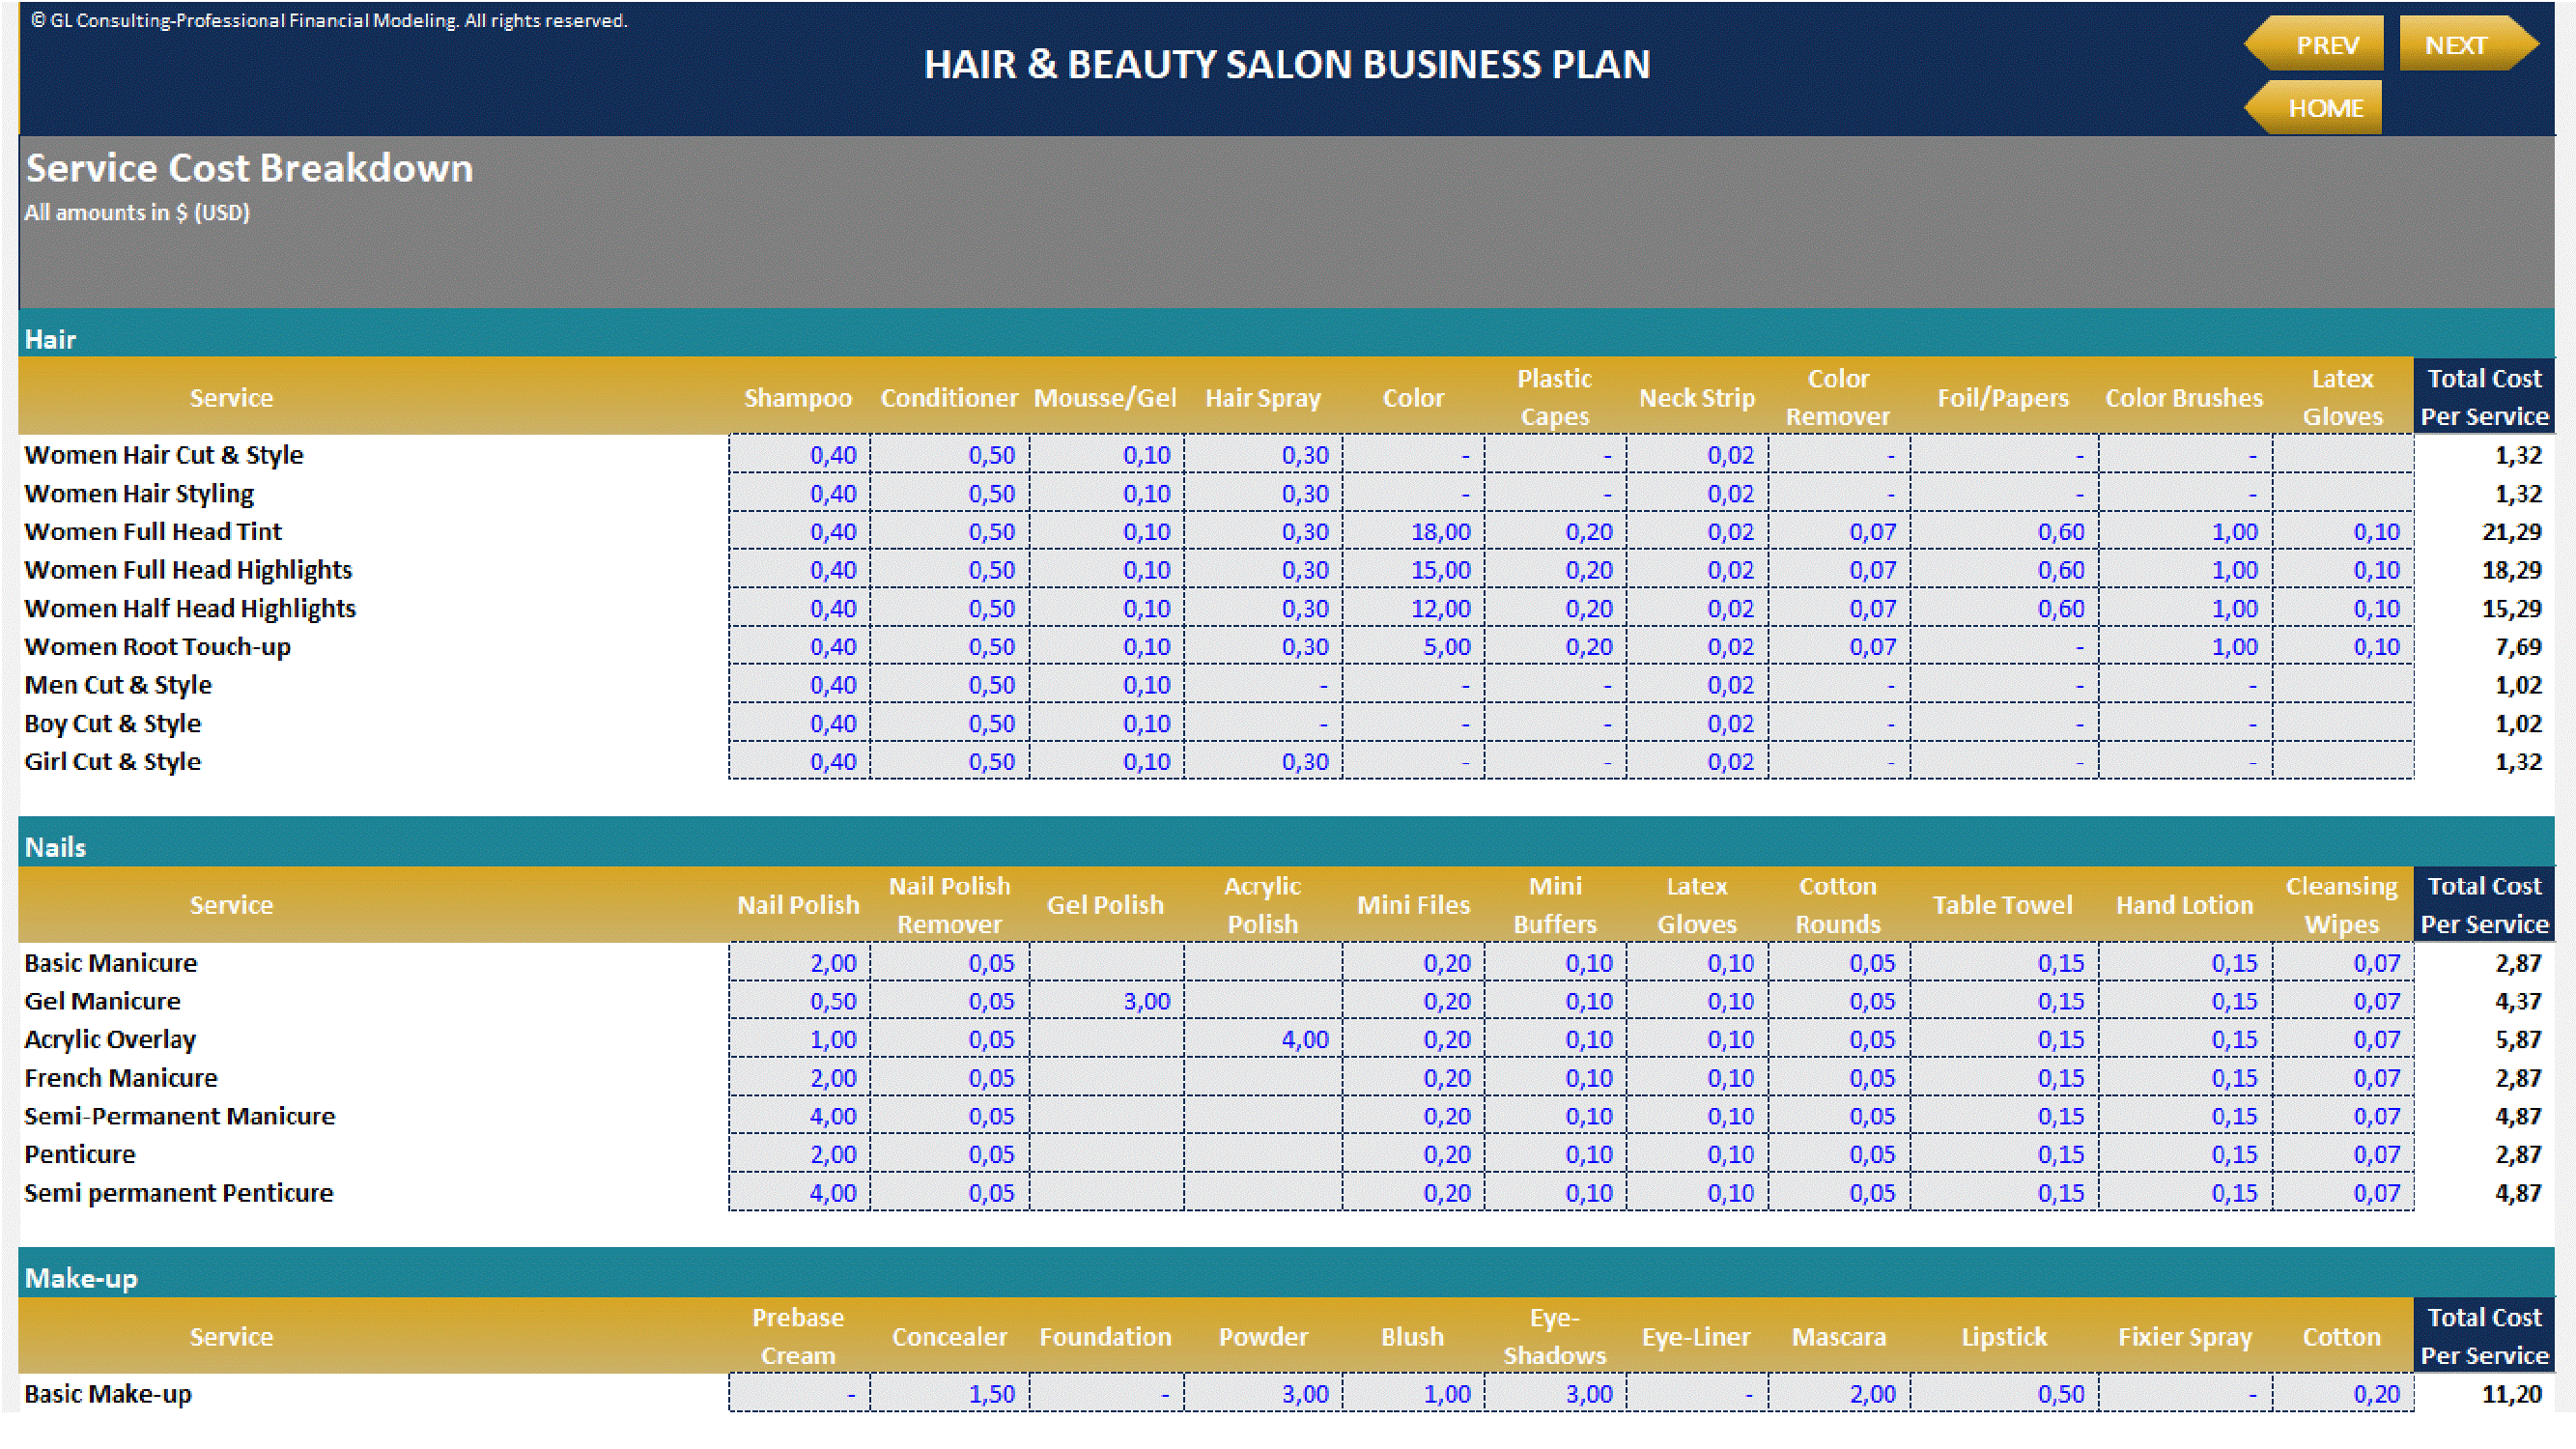 Hair & Beauty Salon Business Plan - 5-Year Financial Projection (Excel template (XLSX)) Preview Image